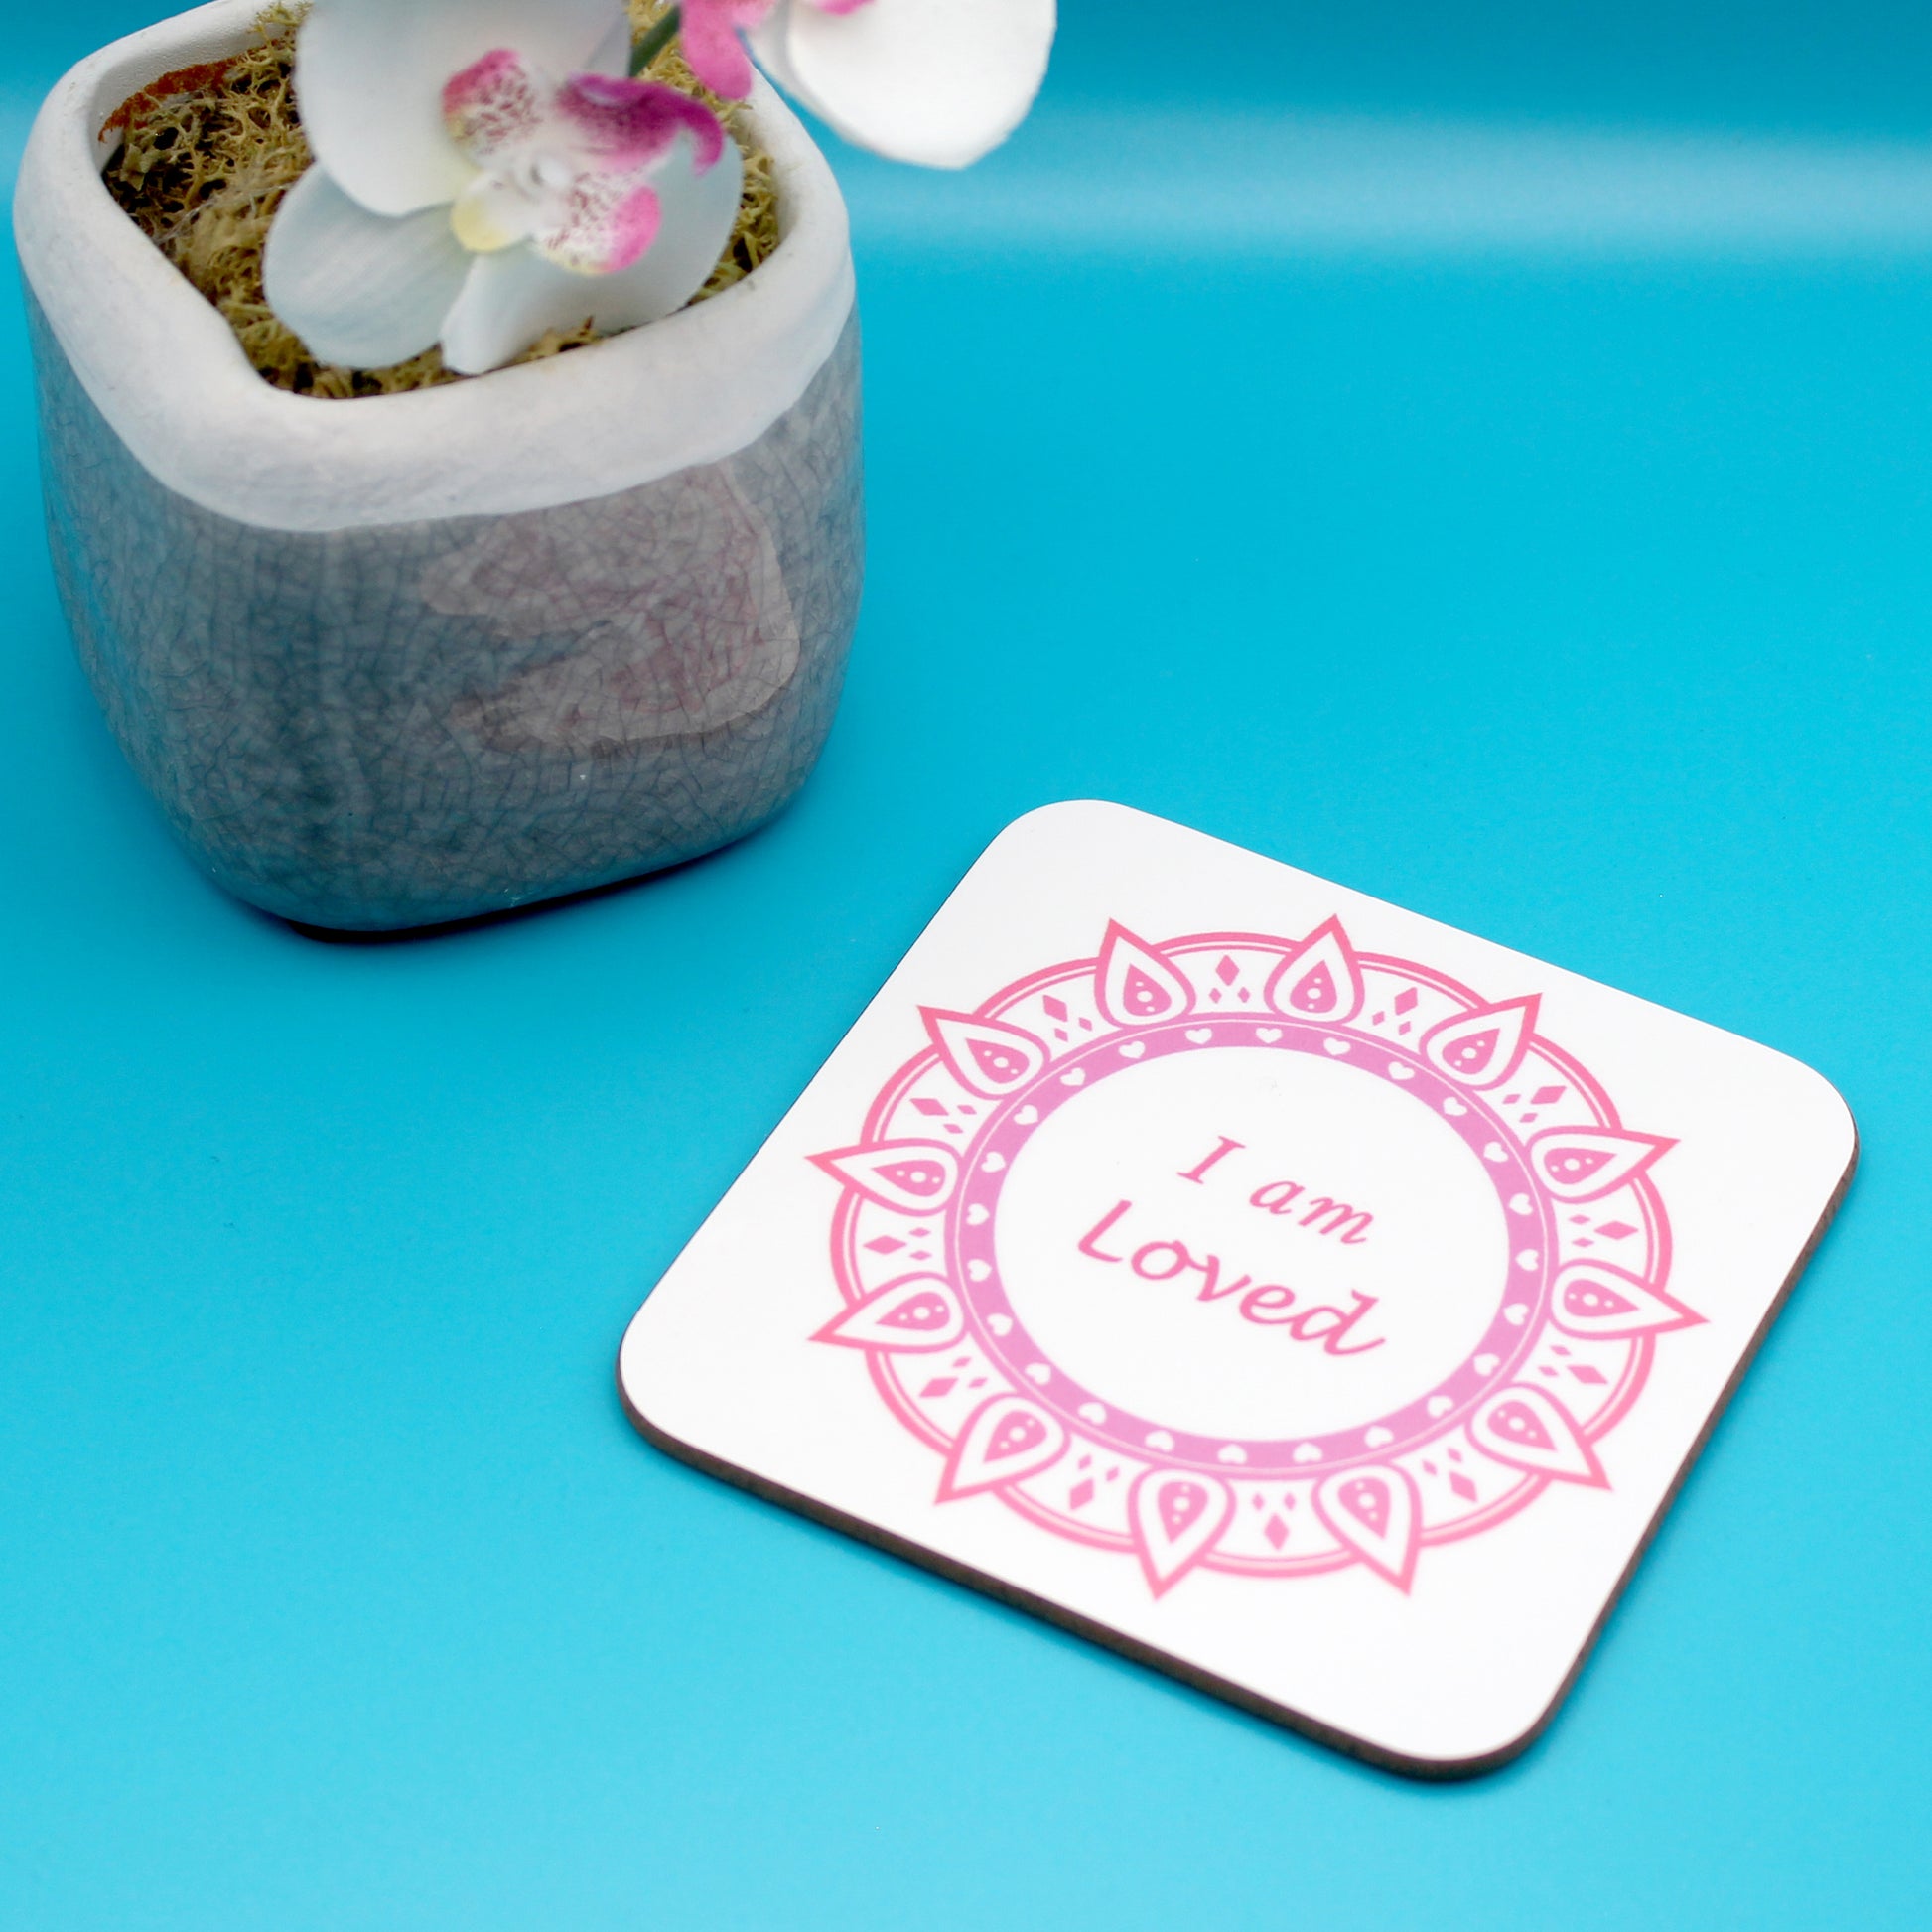 White positive affirmation coaster with pink and red mandala design. Daily affirmation reads I am Loved. Coaster underneath shows wood backing. Blue background with potted pink orchid to left corner.